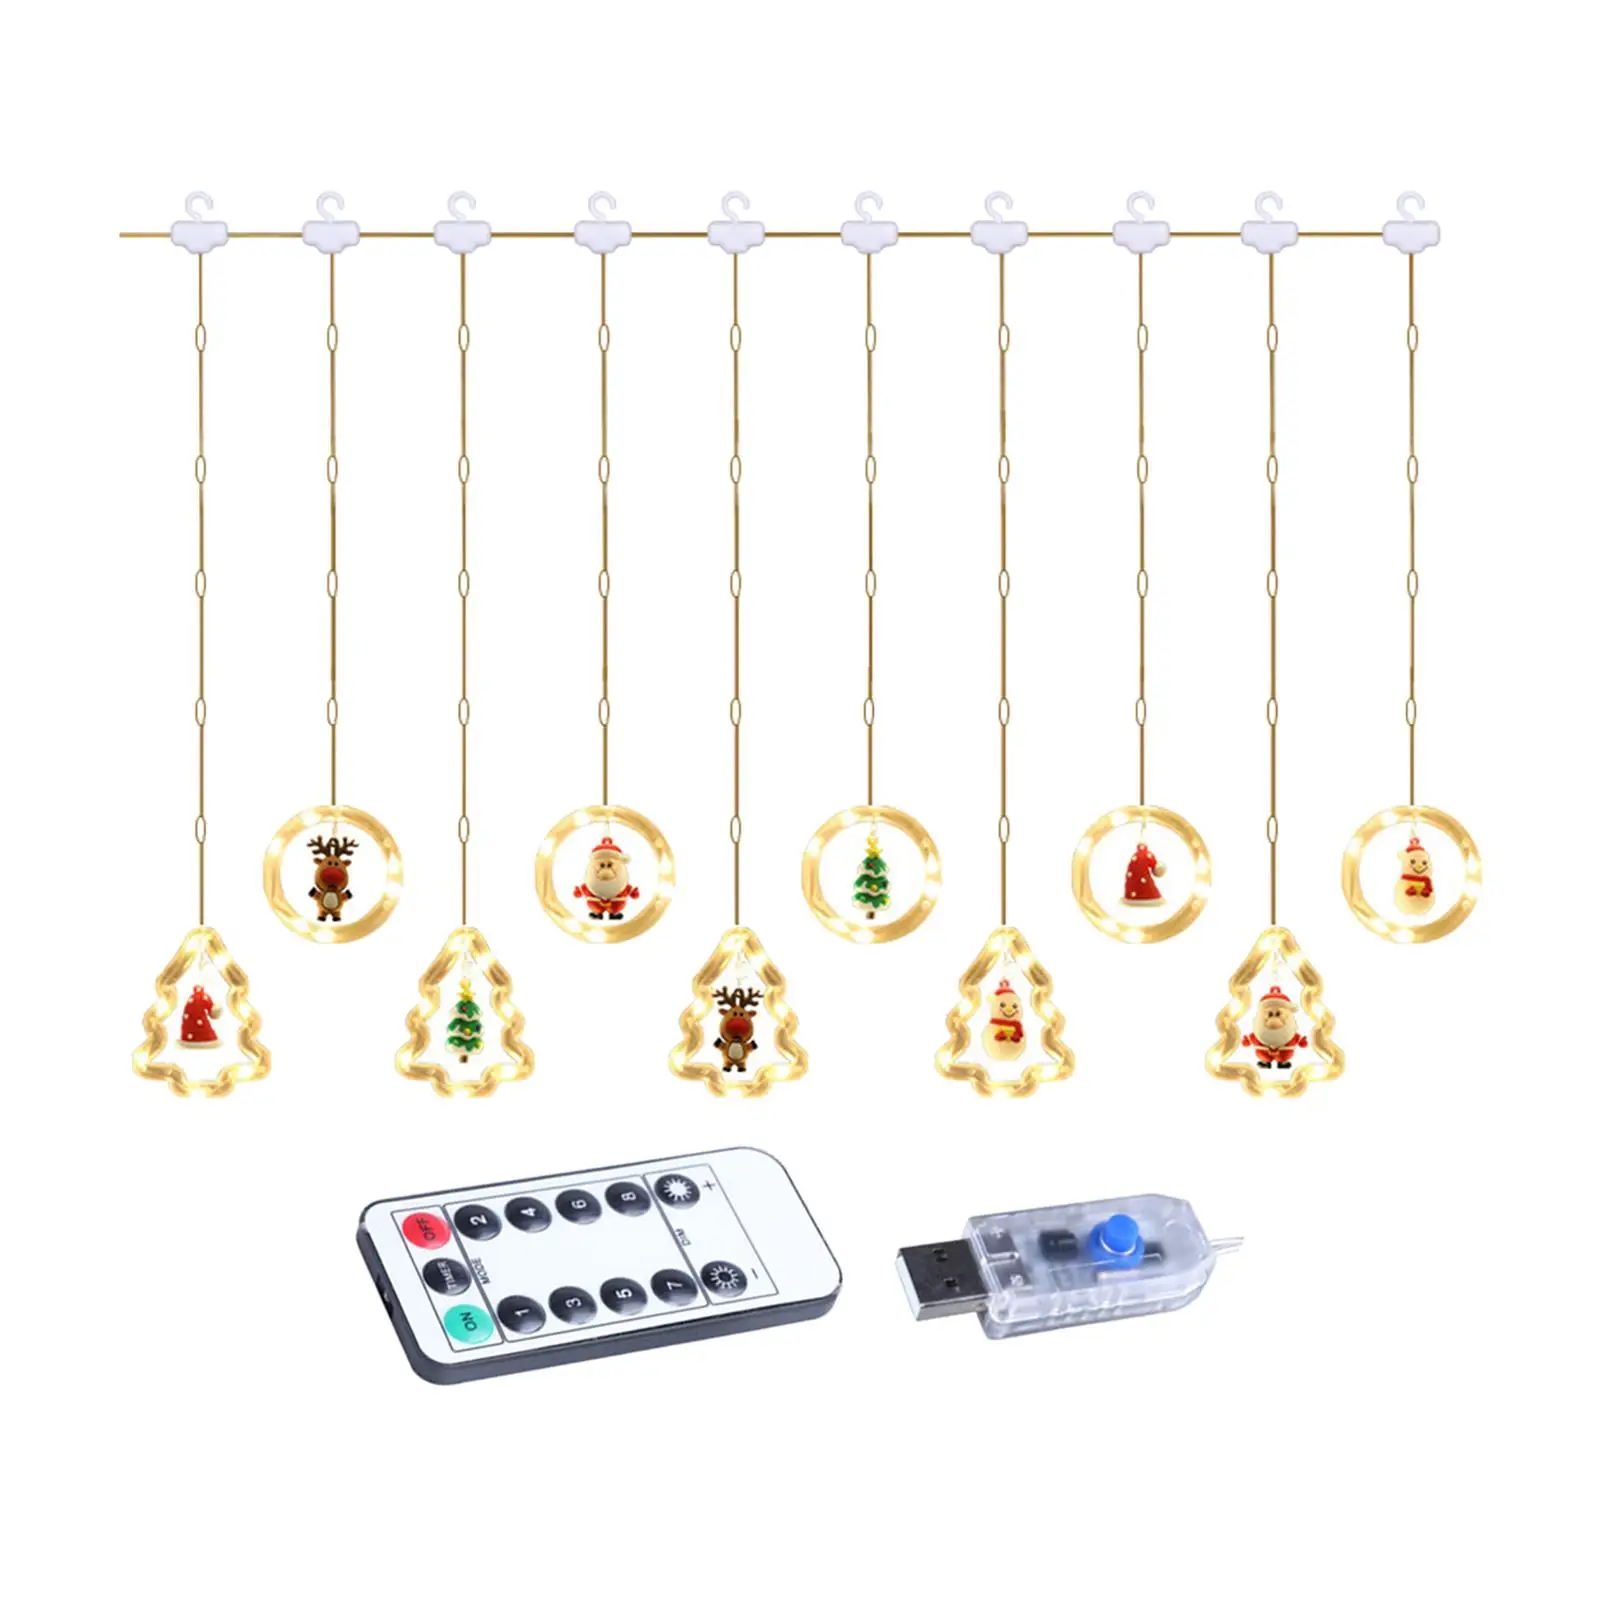 LED Christmas String Light Lighting Remote Control Hanging Ornament for Party Bar Yard Window Decoration